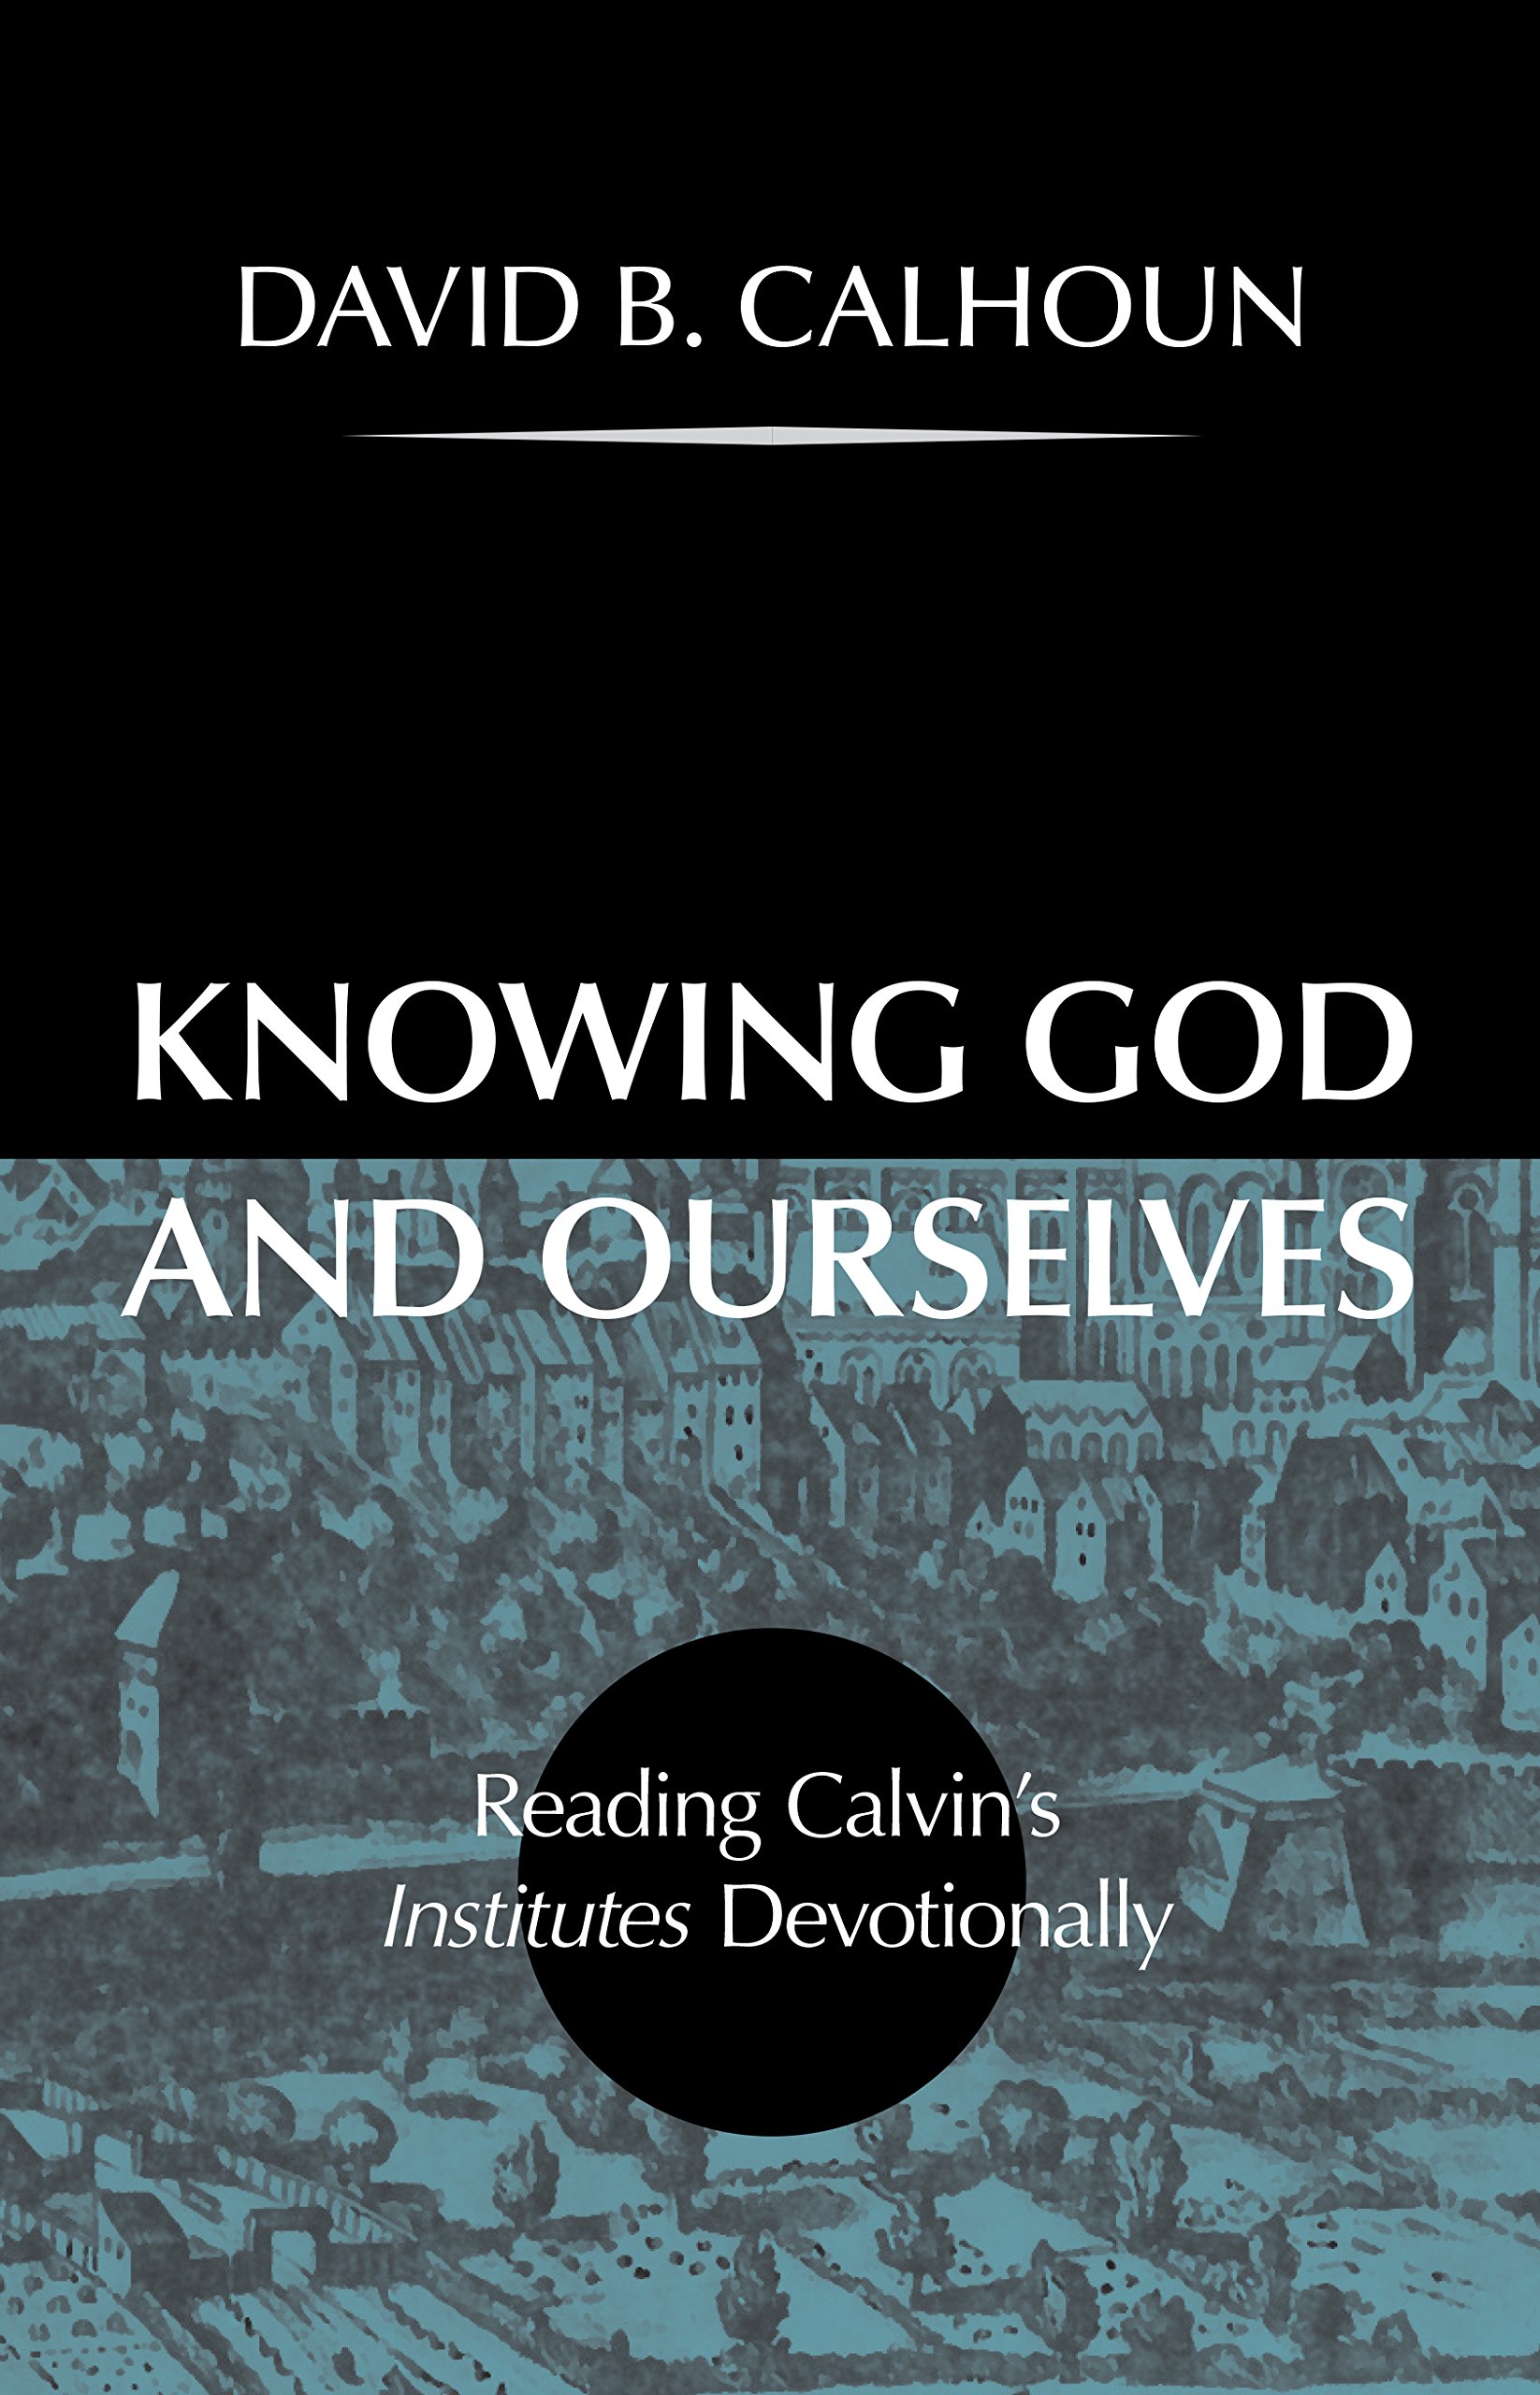 KNOWING GOD AND OURSELVES: READING CALVIN’S INSTITUTES DEVOTIONALLY, by David B. Calhoun